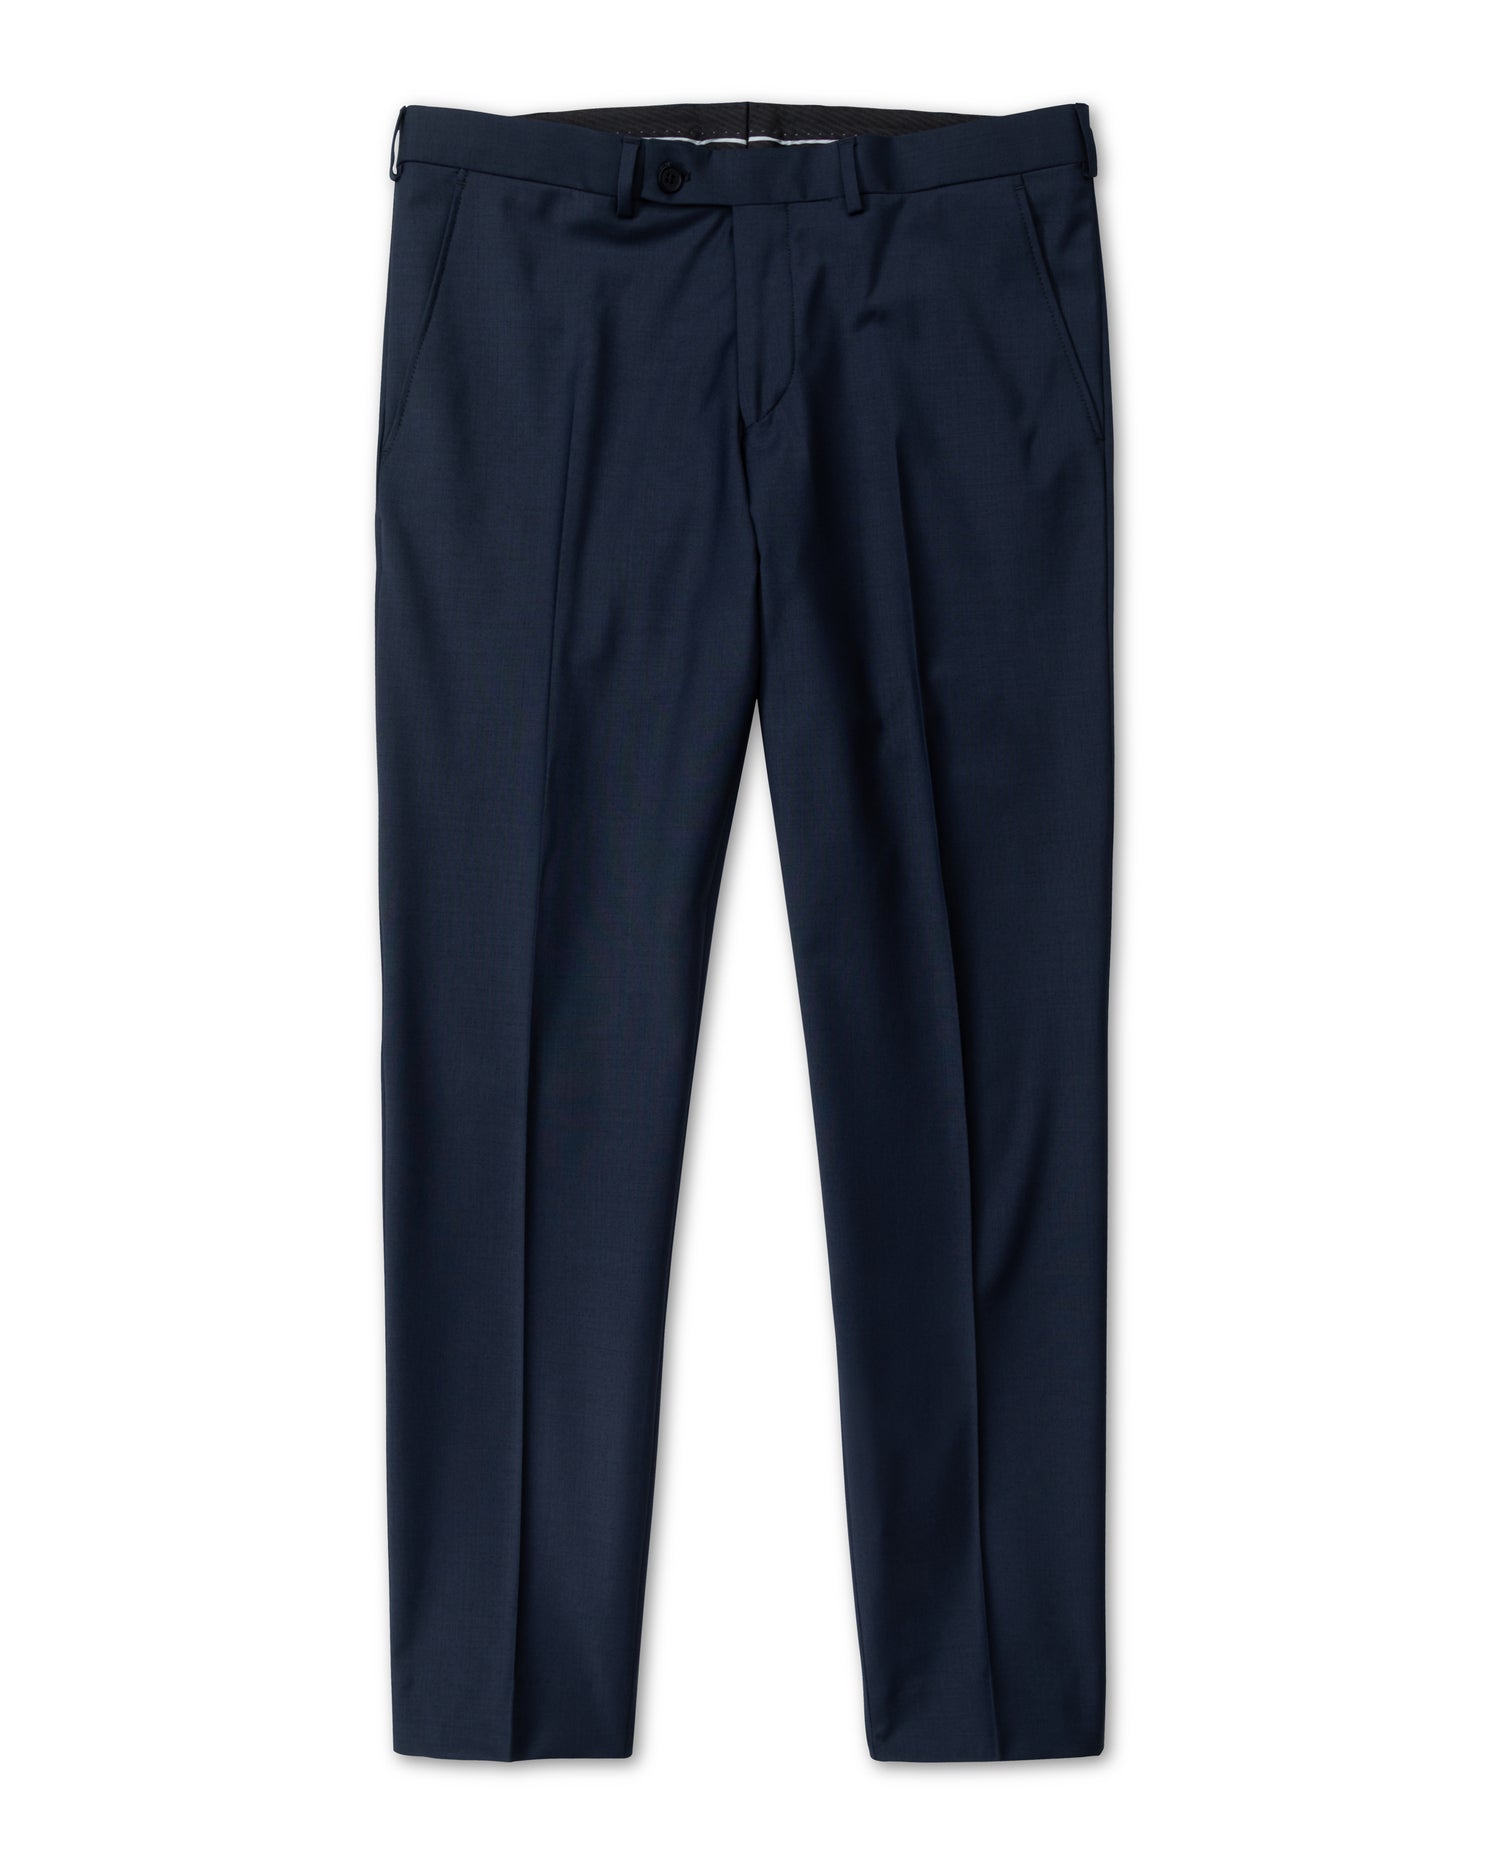 Navy Blue Athlete Fit Suit Trousers in Stretch Fabric (2079950569534)